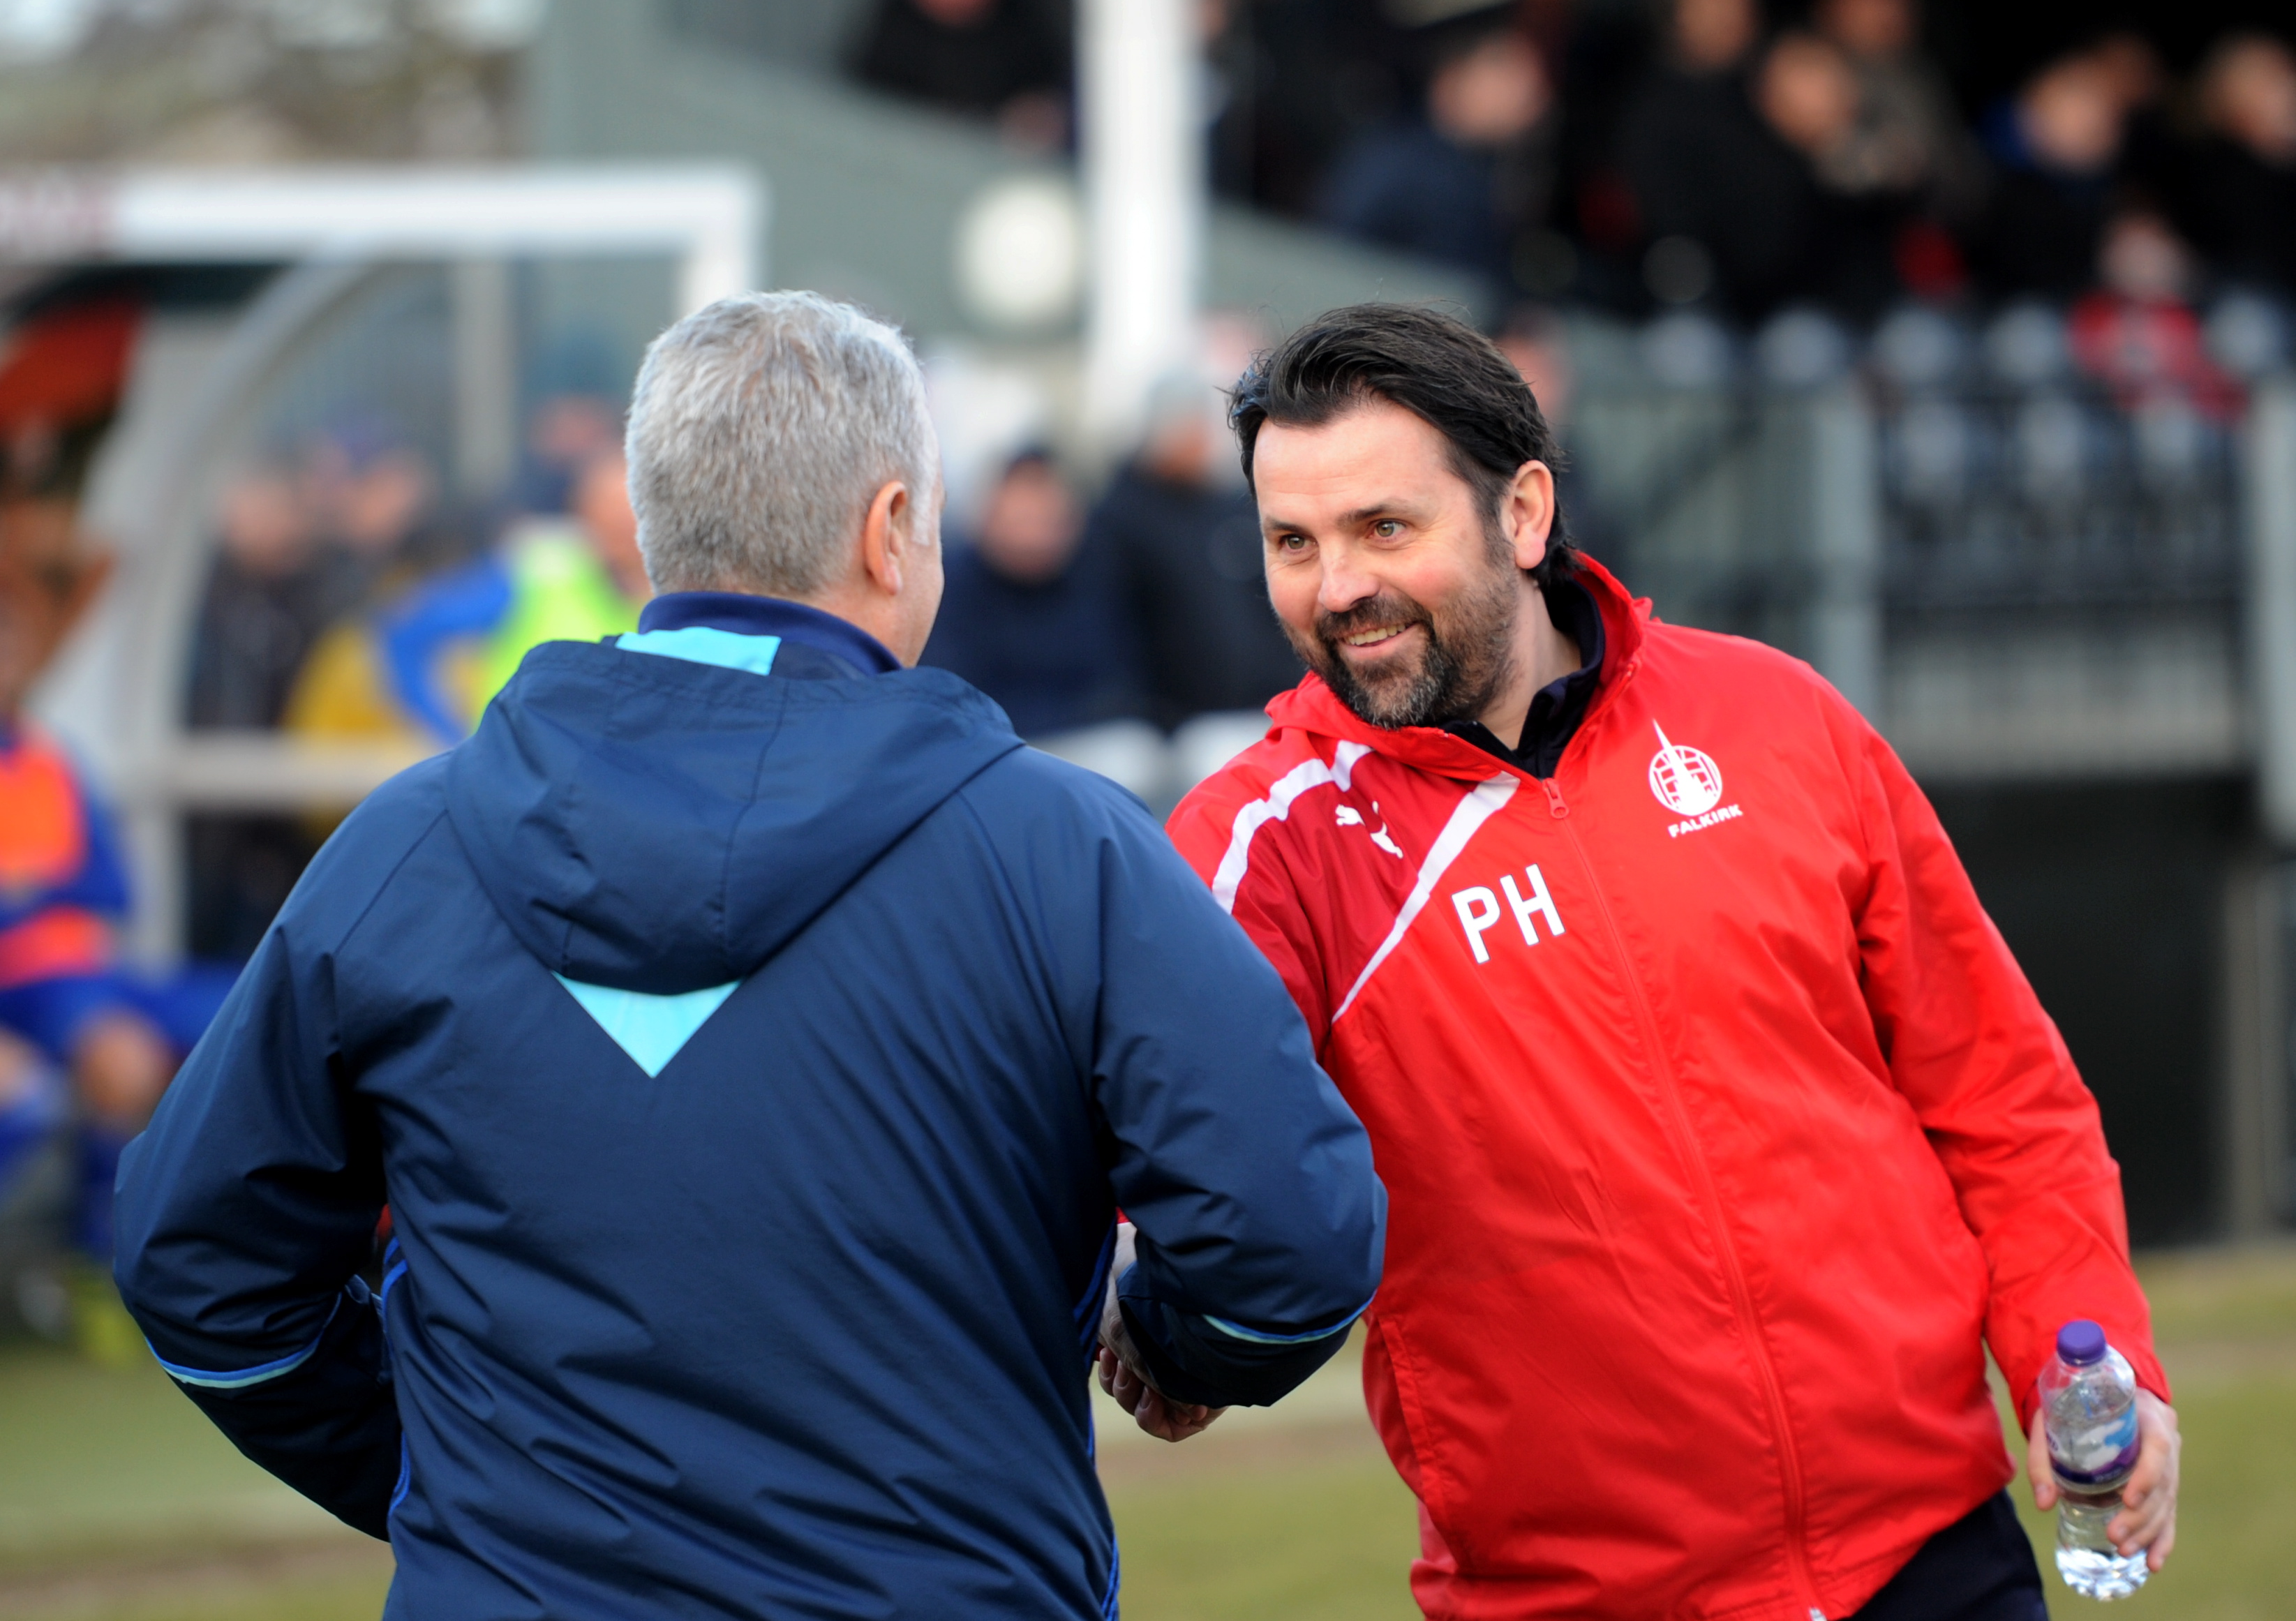 Paul Hartley and John Sheran shake hands ahead of Cove Rangers' Scottish Cup tie with Falkirk in 2018.